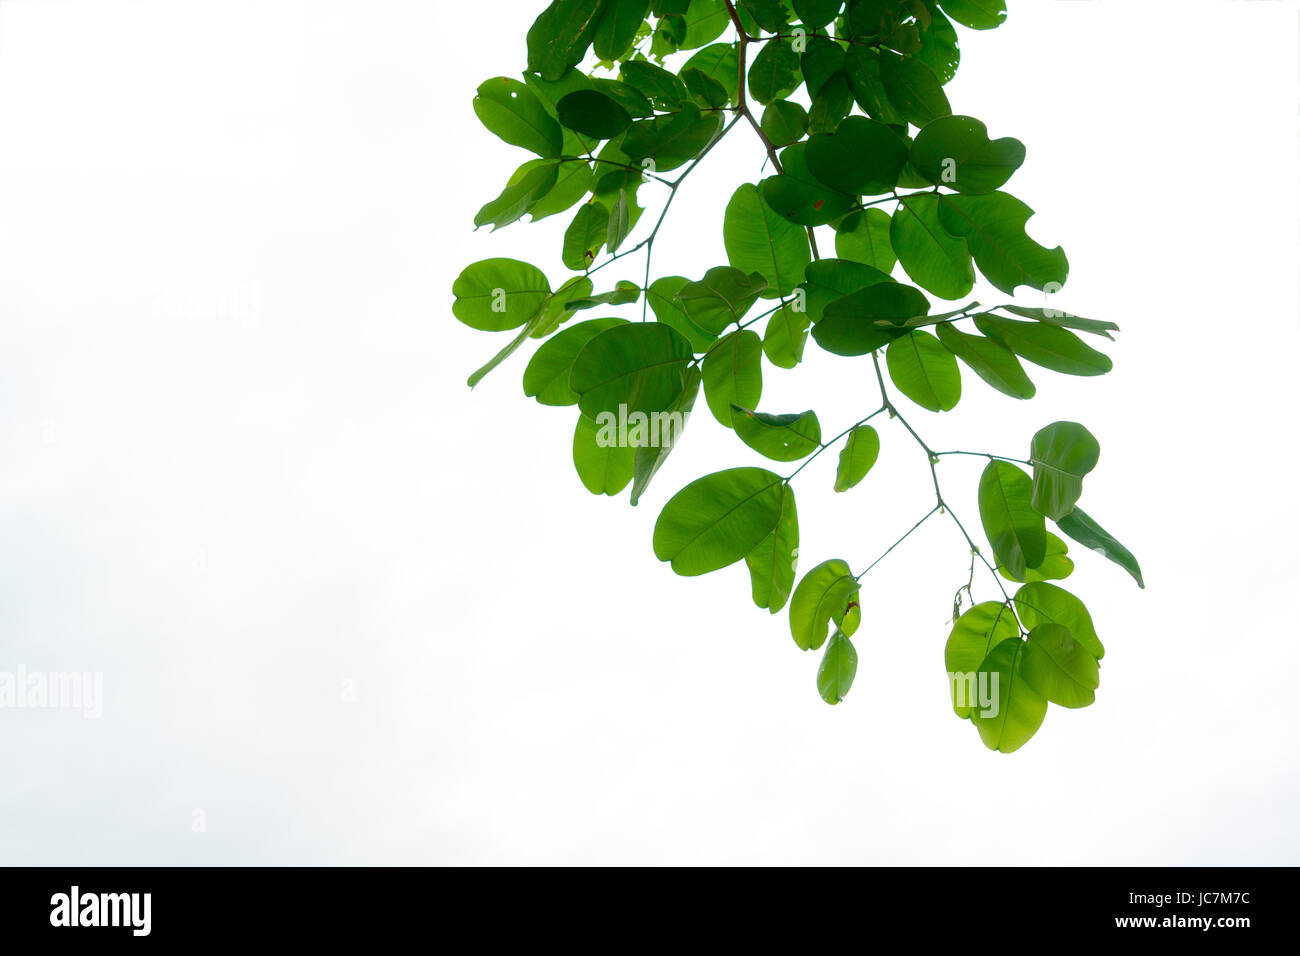 The branches and leaves are green on a white background. Stock Photo